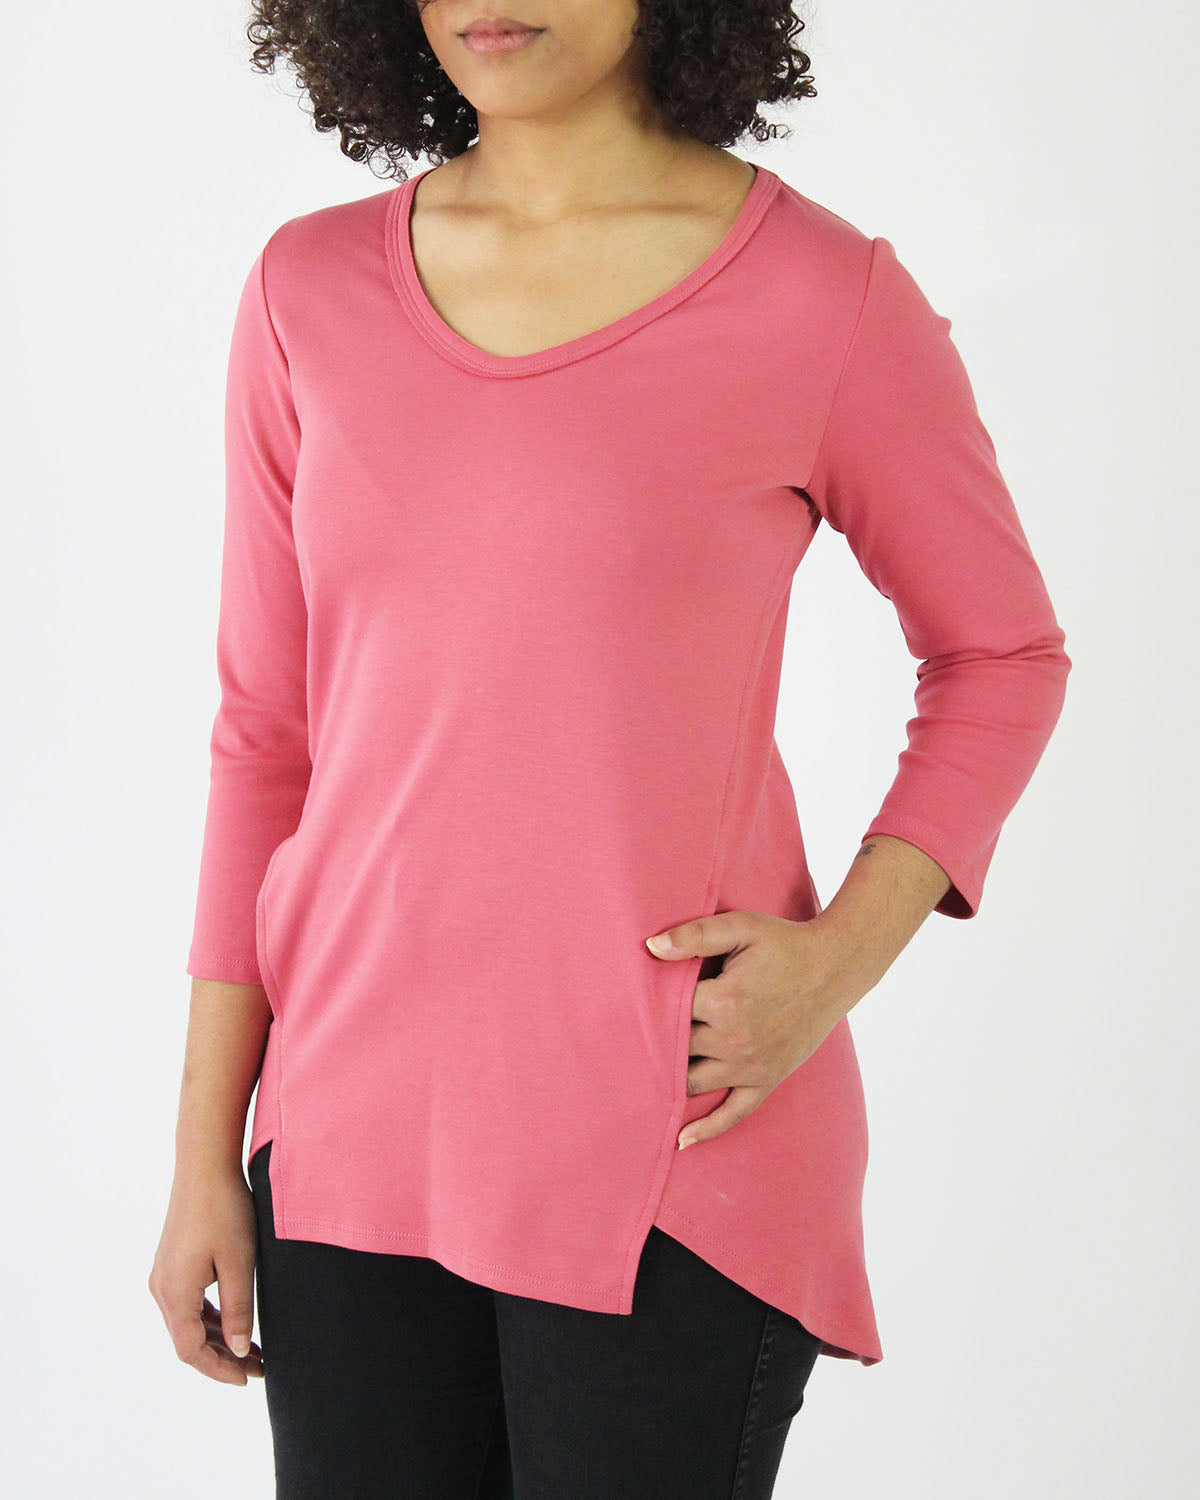 Pima Pocket Tee in Discontinued Colors